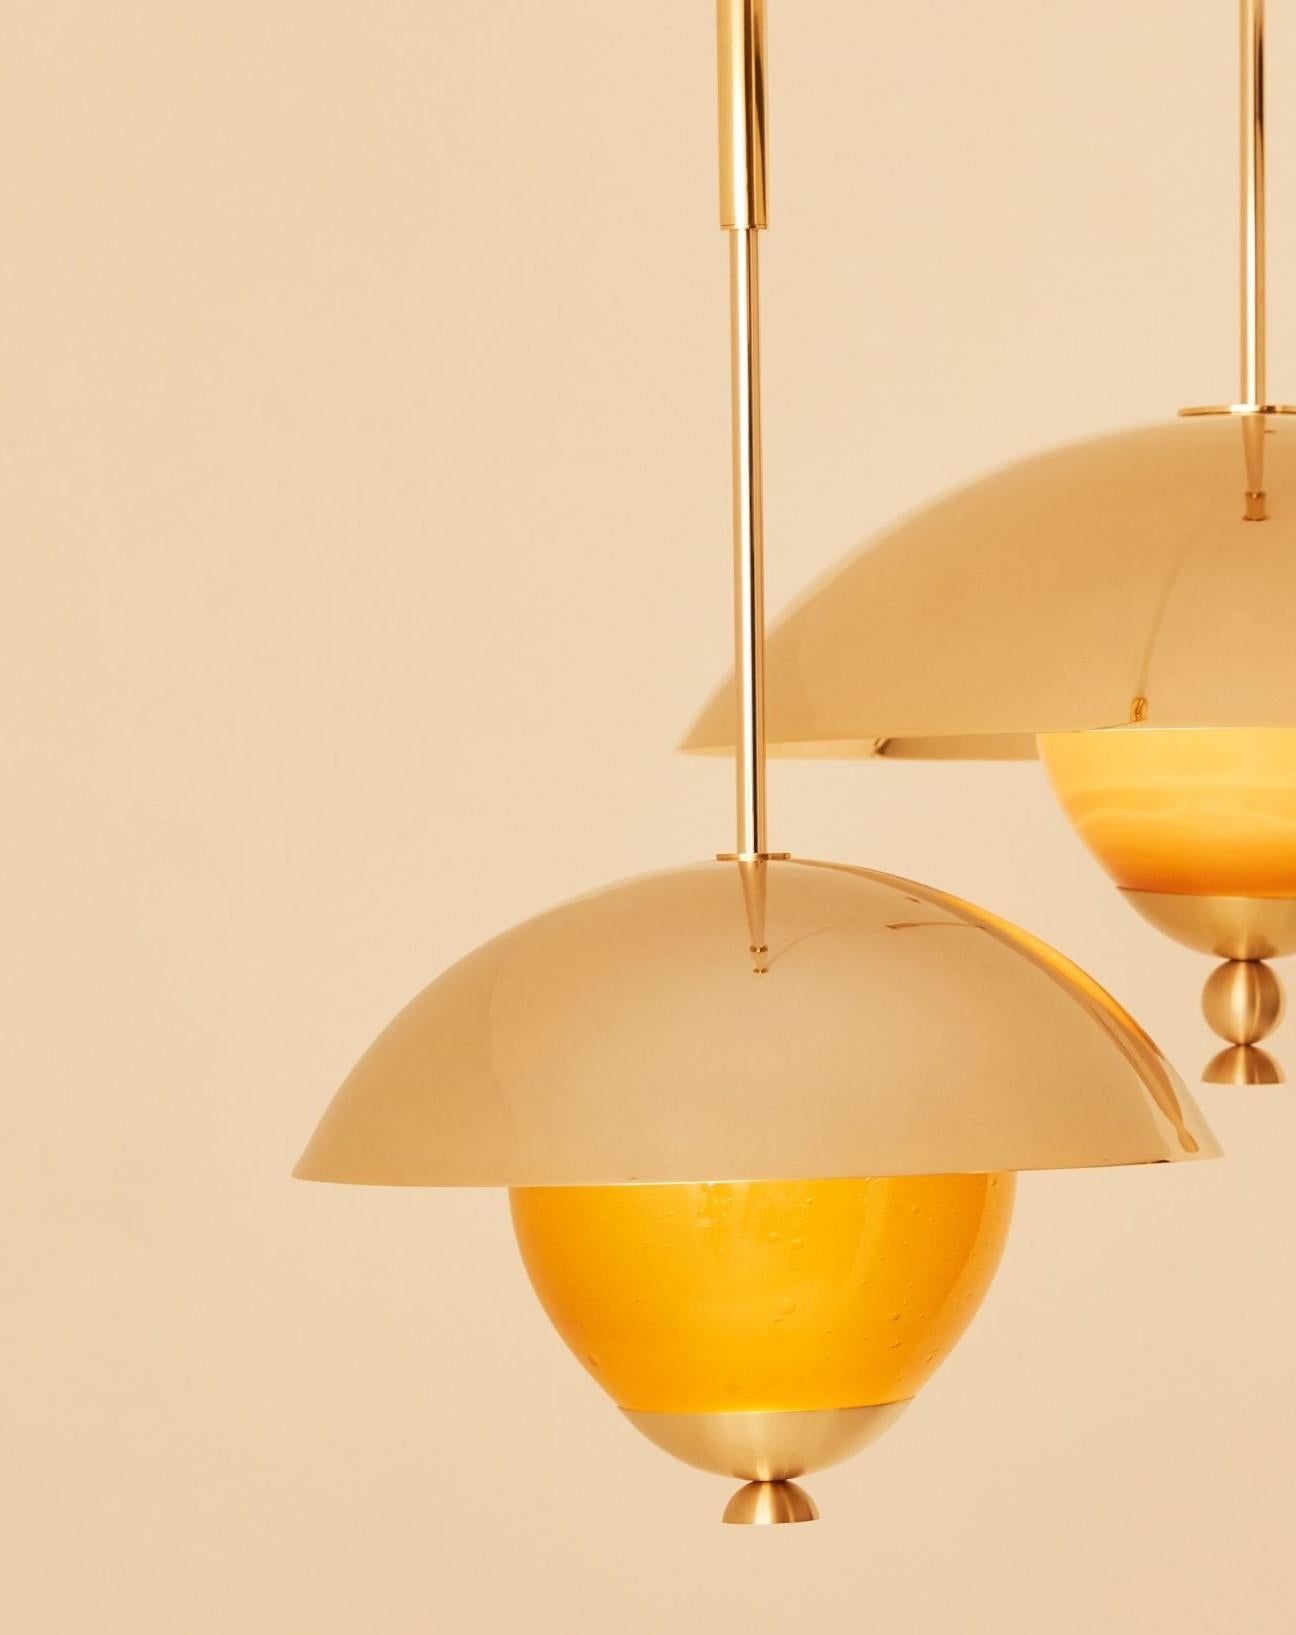 Set of 2 Celeste pendant light by Mydriaz.
Dimensions: S : diam 40 x prof 28 cm
 L : diam 60 x prof 34 cm
Materials: Brass, glass
Finishes: Golden-plated polished brass, white nickel finish on polished brass, Black nickel finish on polished